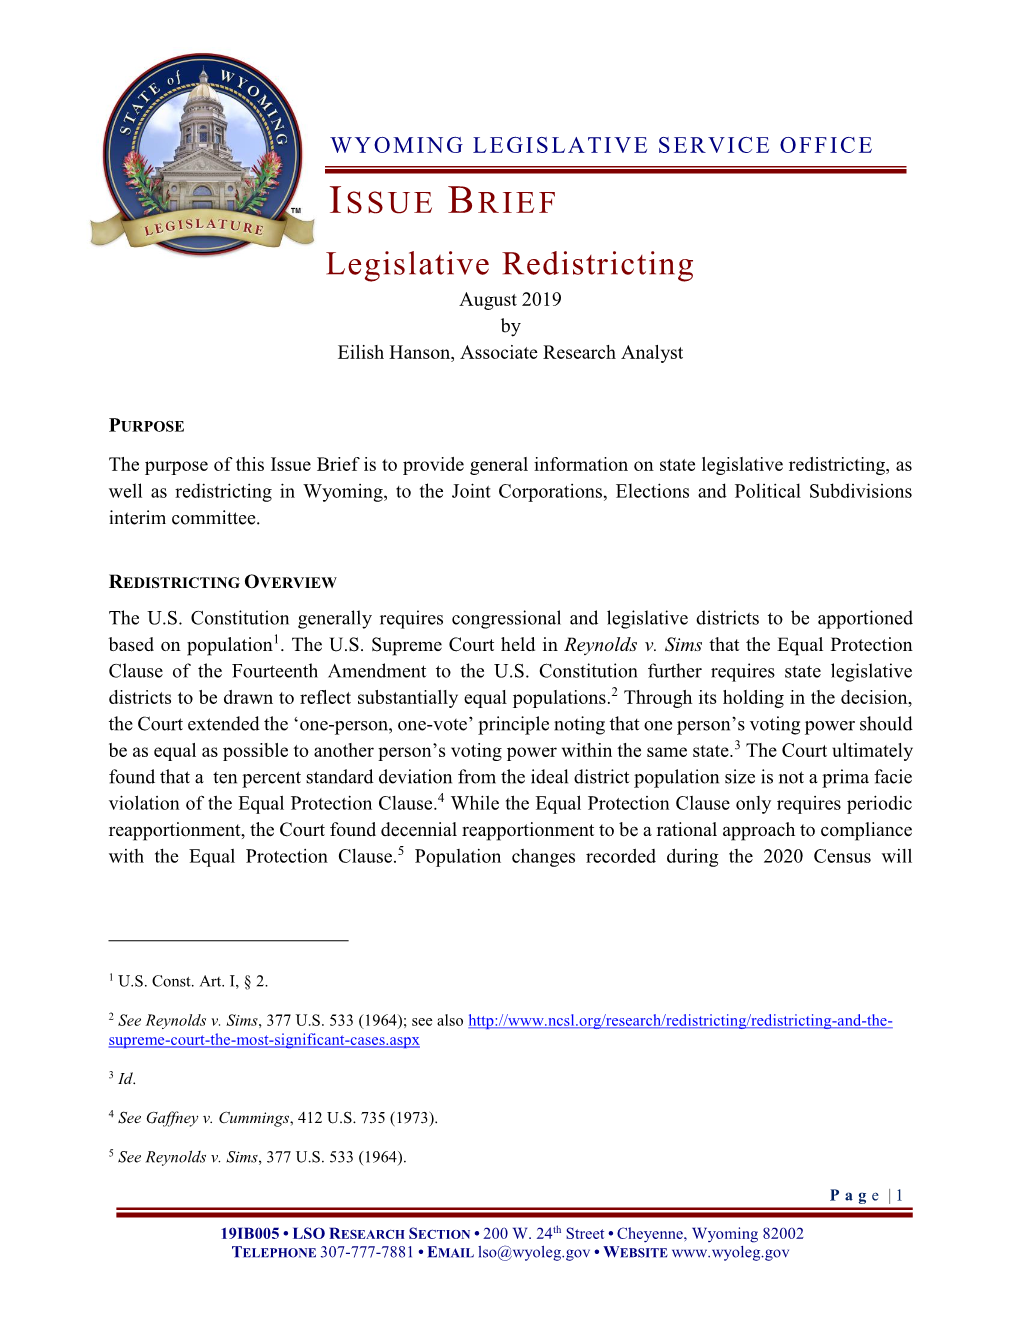 Redistricting August 2019 by Eilish Hanson, Associate Research Analyst